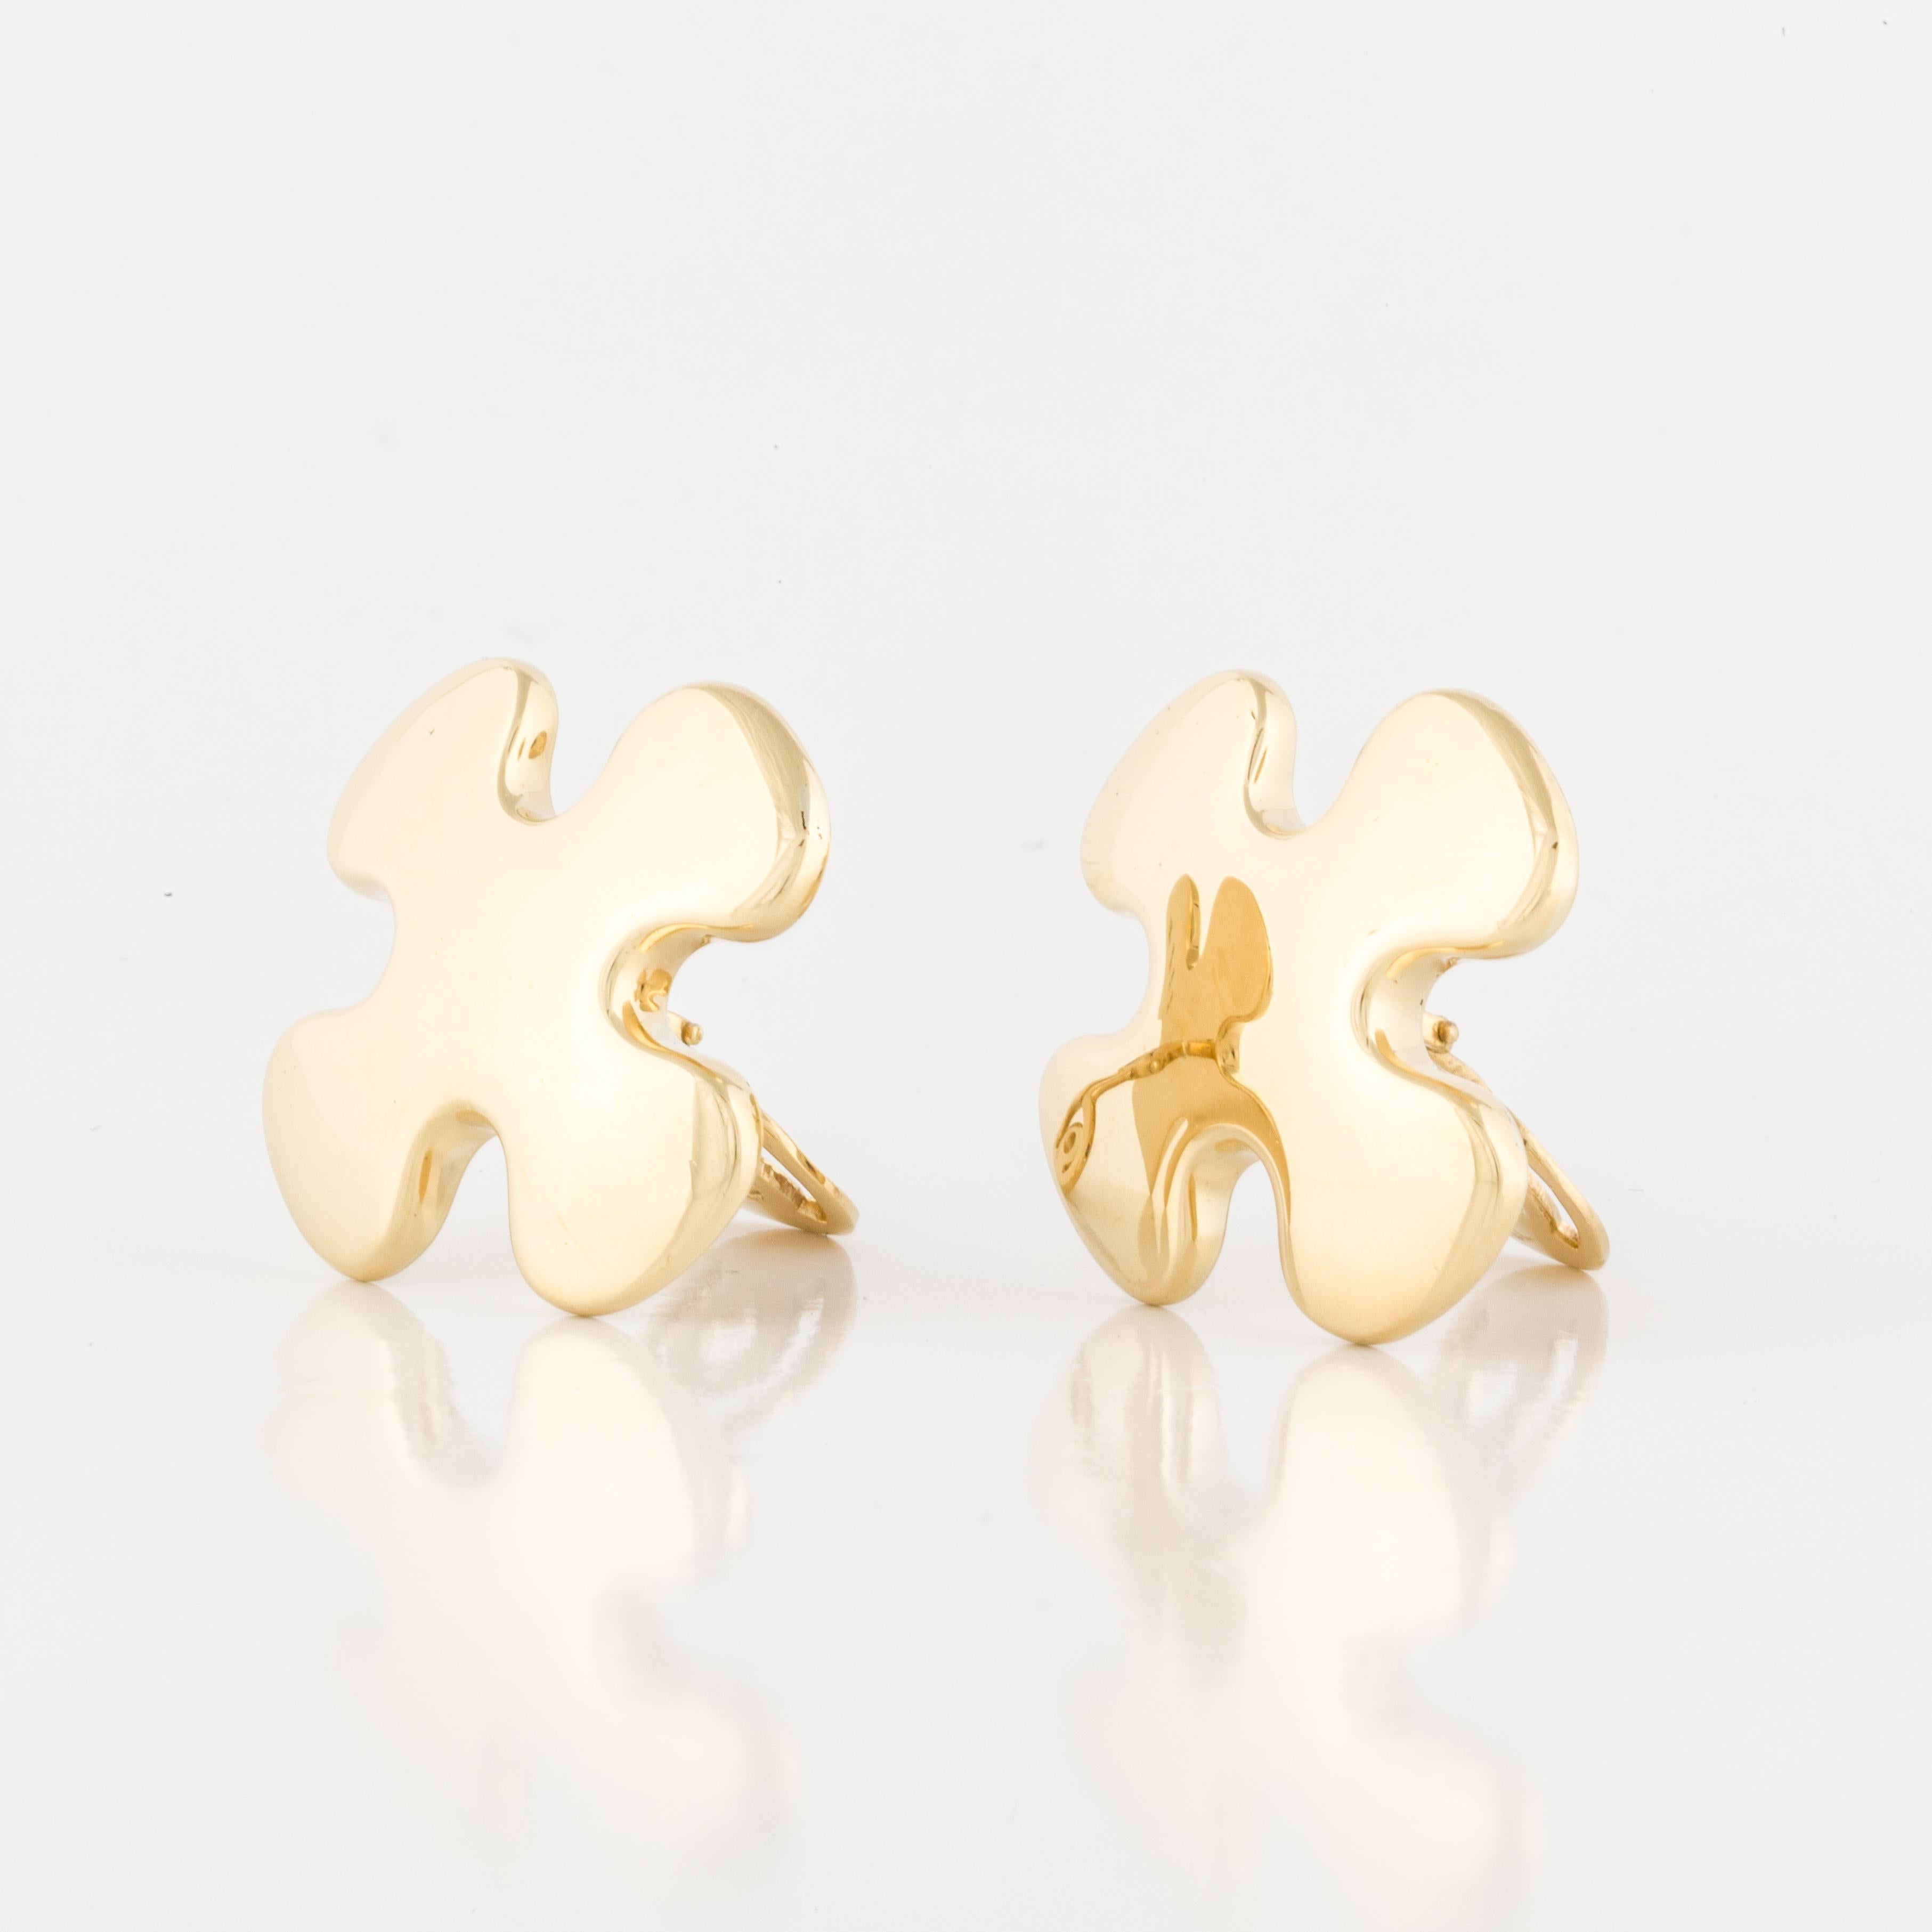 Tane of Mexico ear clips in 18K yellow gold in the shape of a soft cornered 